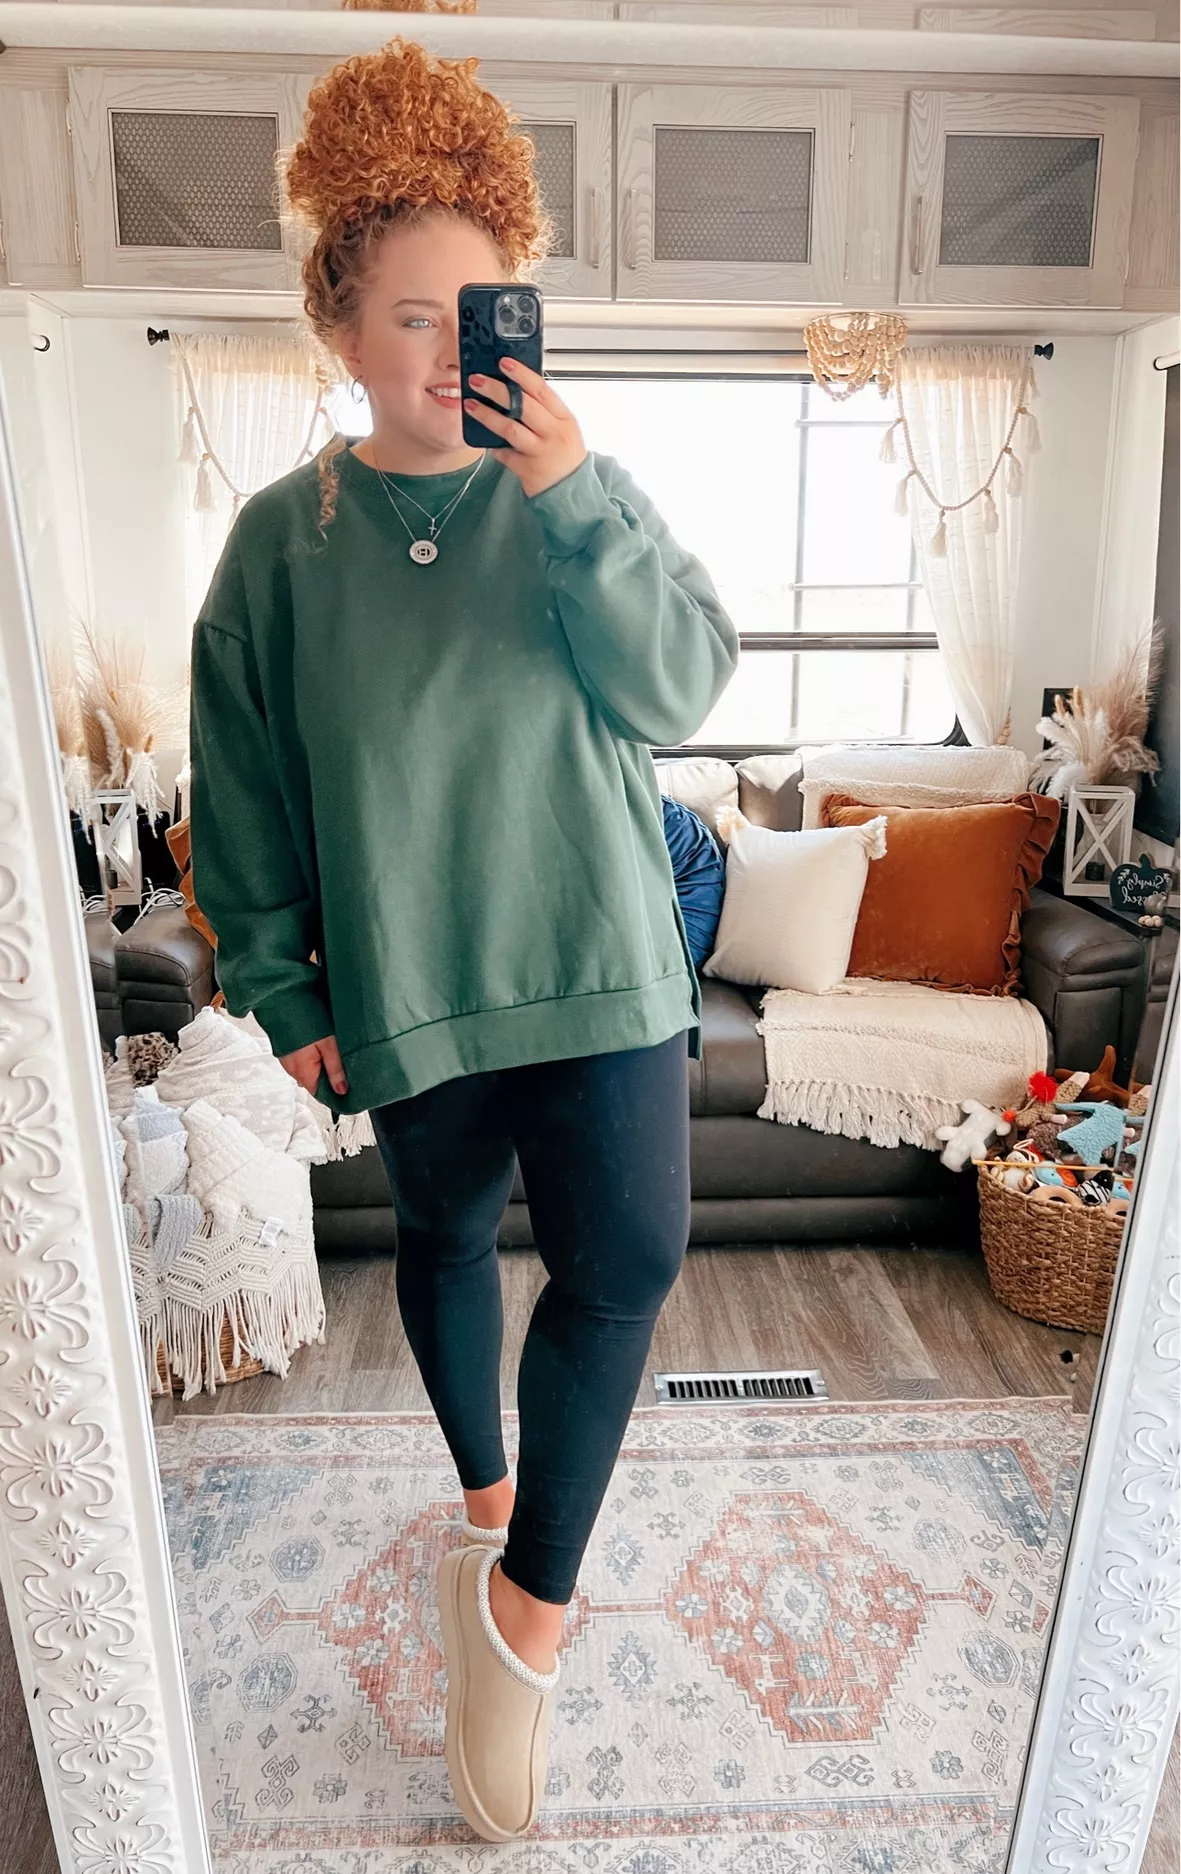 green oversized Sweatshirt with ribbed leggings-2 - 50 IS NOT OLD -  A Fashion And Beauty Blog For Women Over 50